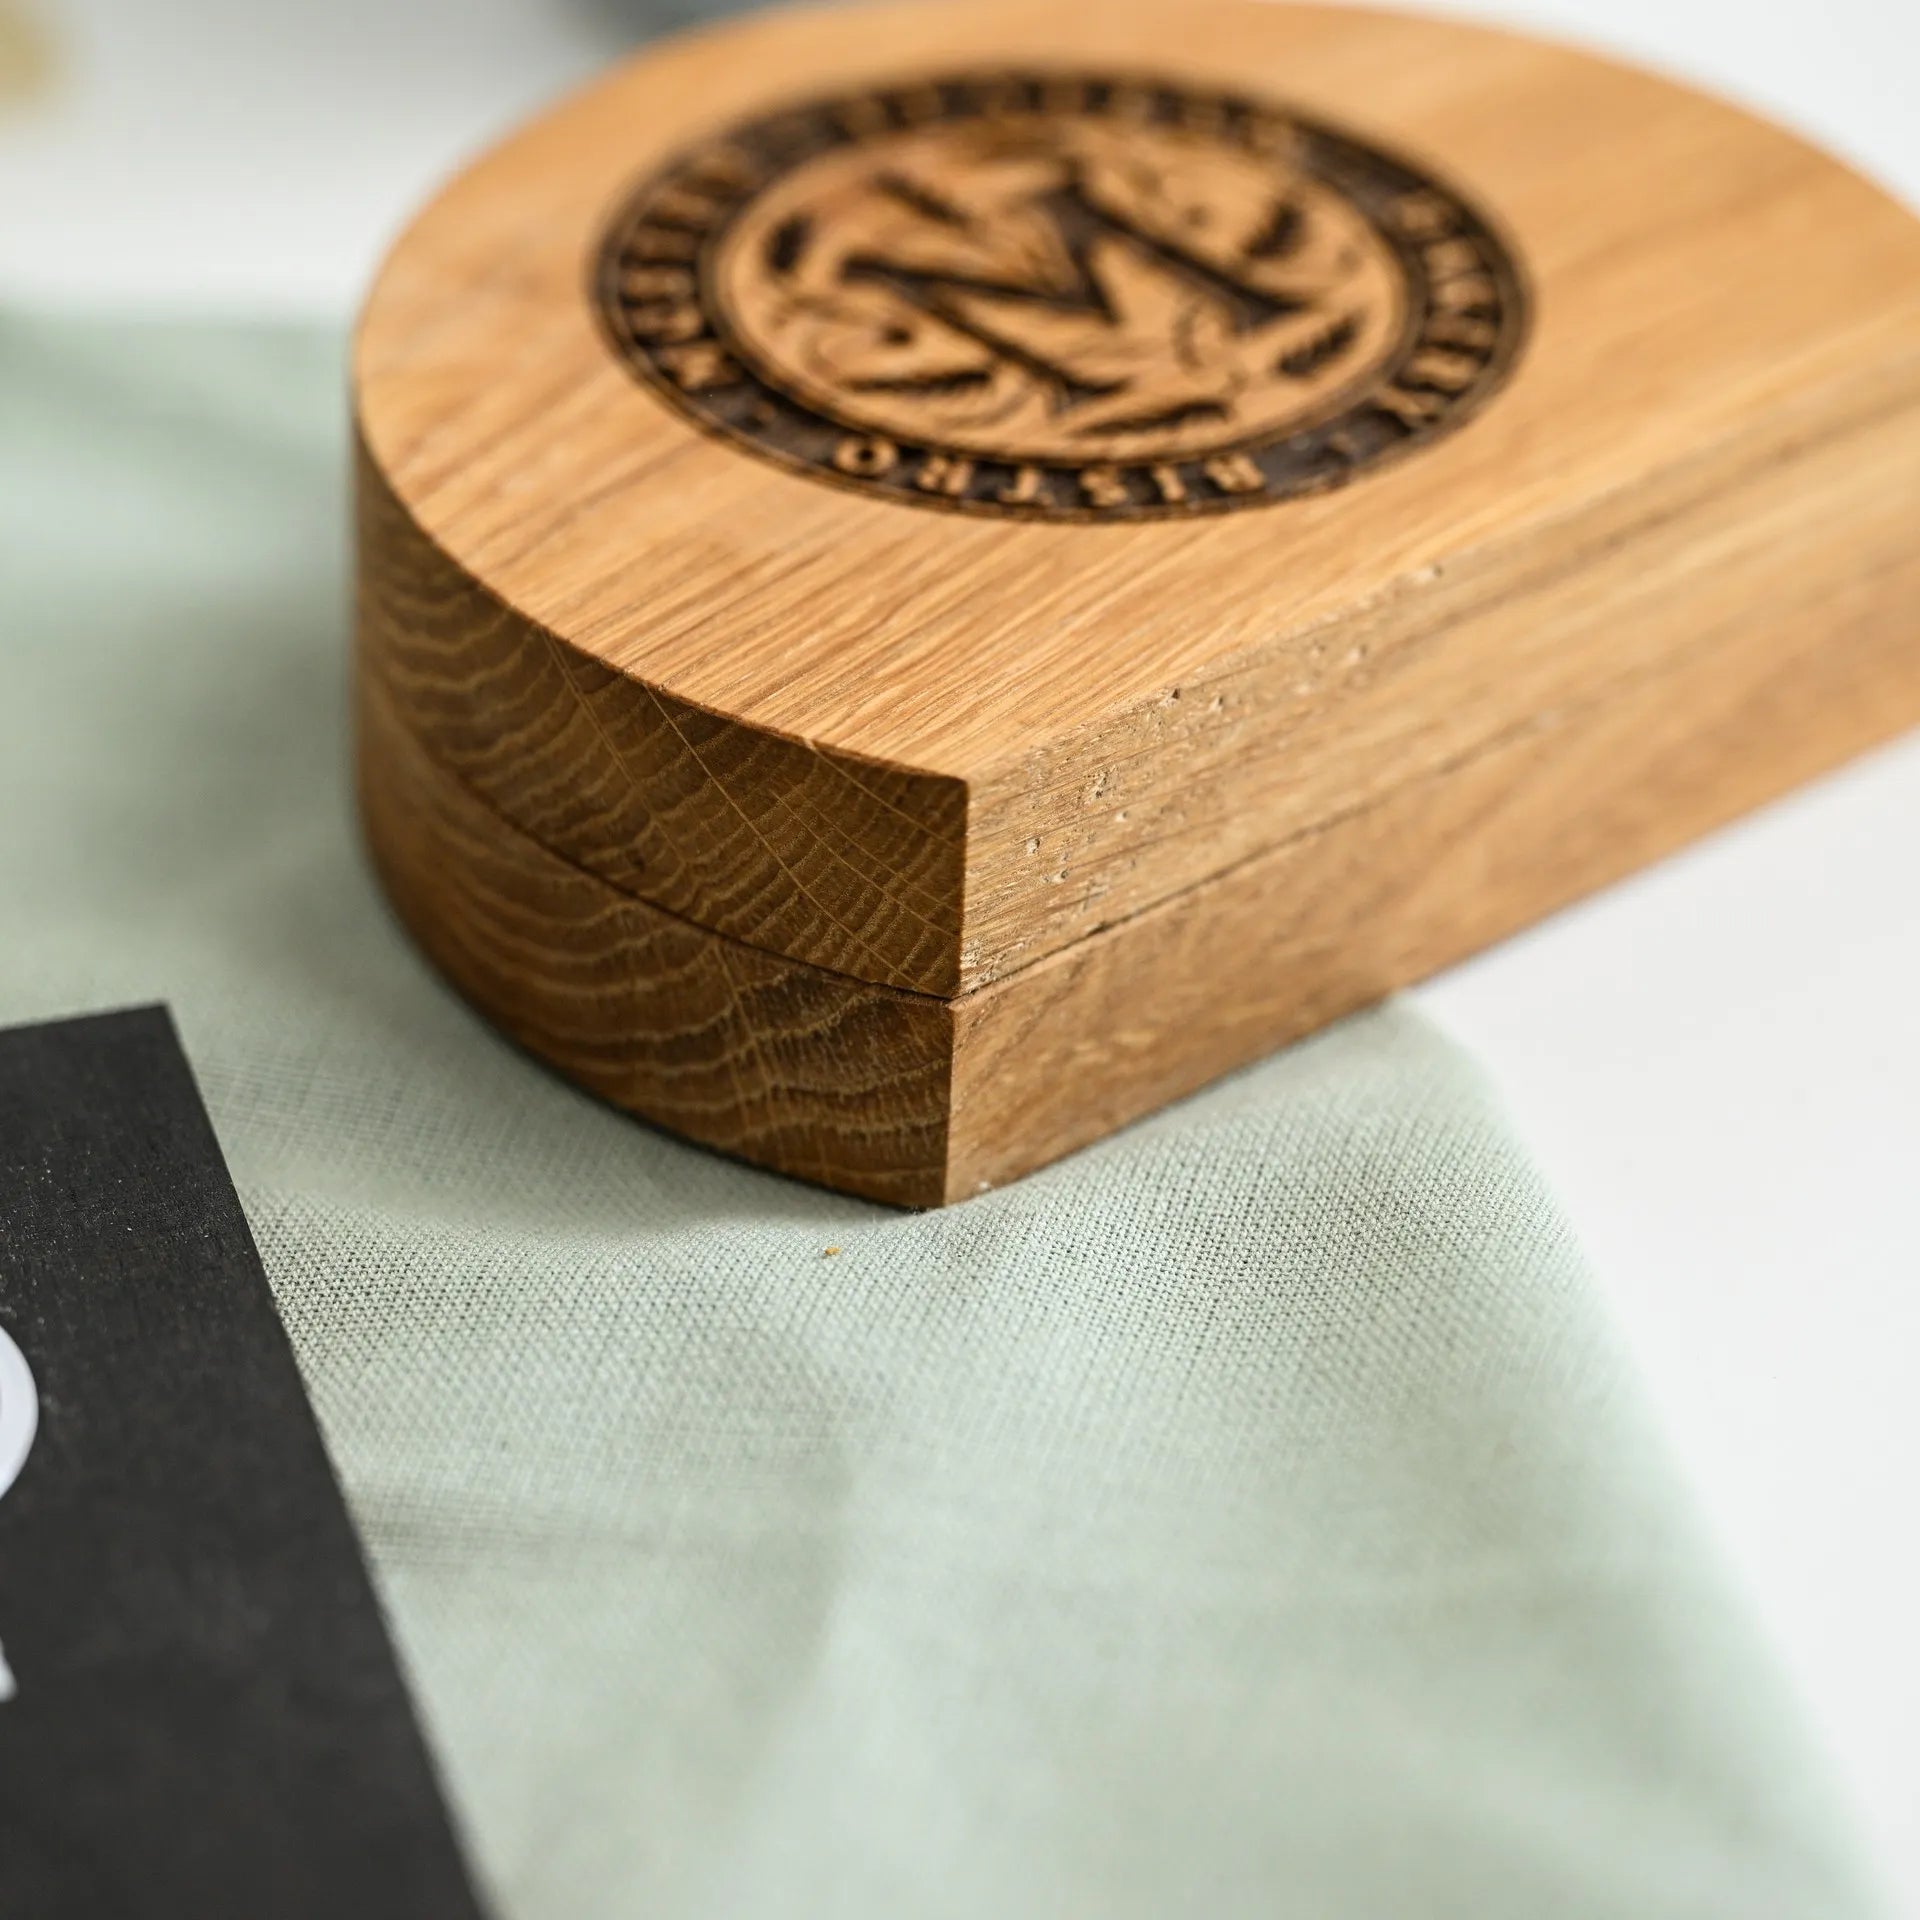 Elevate your establishment with our wooden stand featuring an NFC tag and QR code for easy access to information.